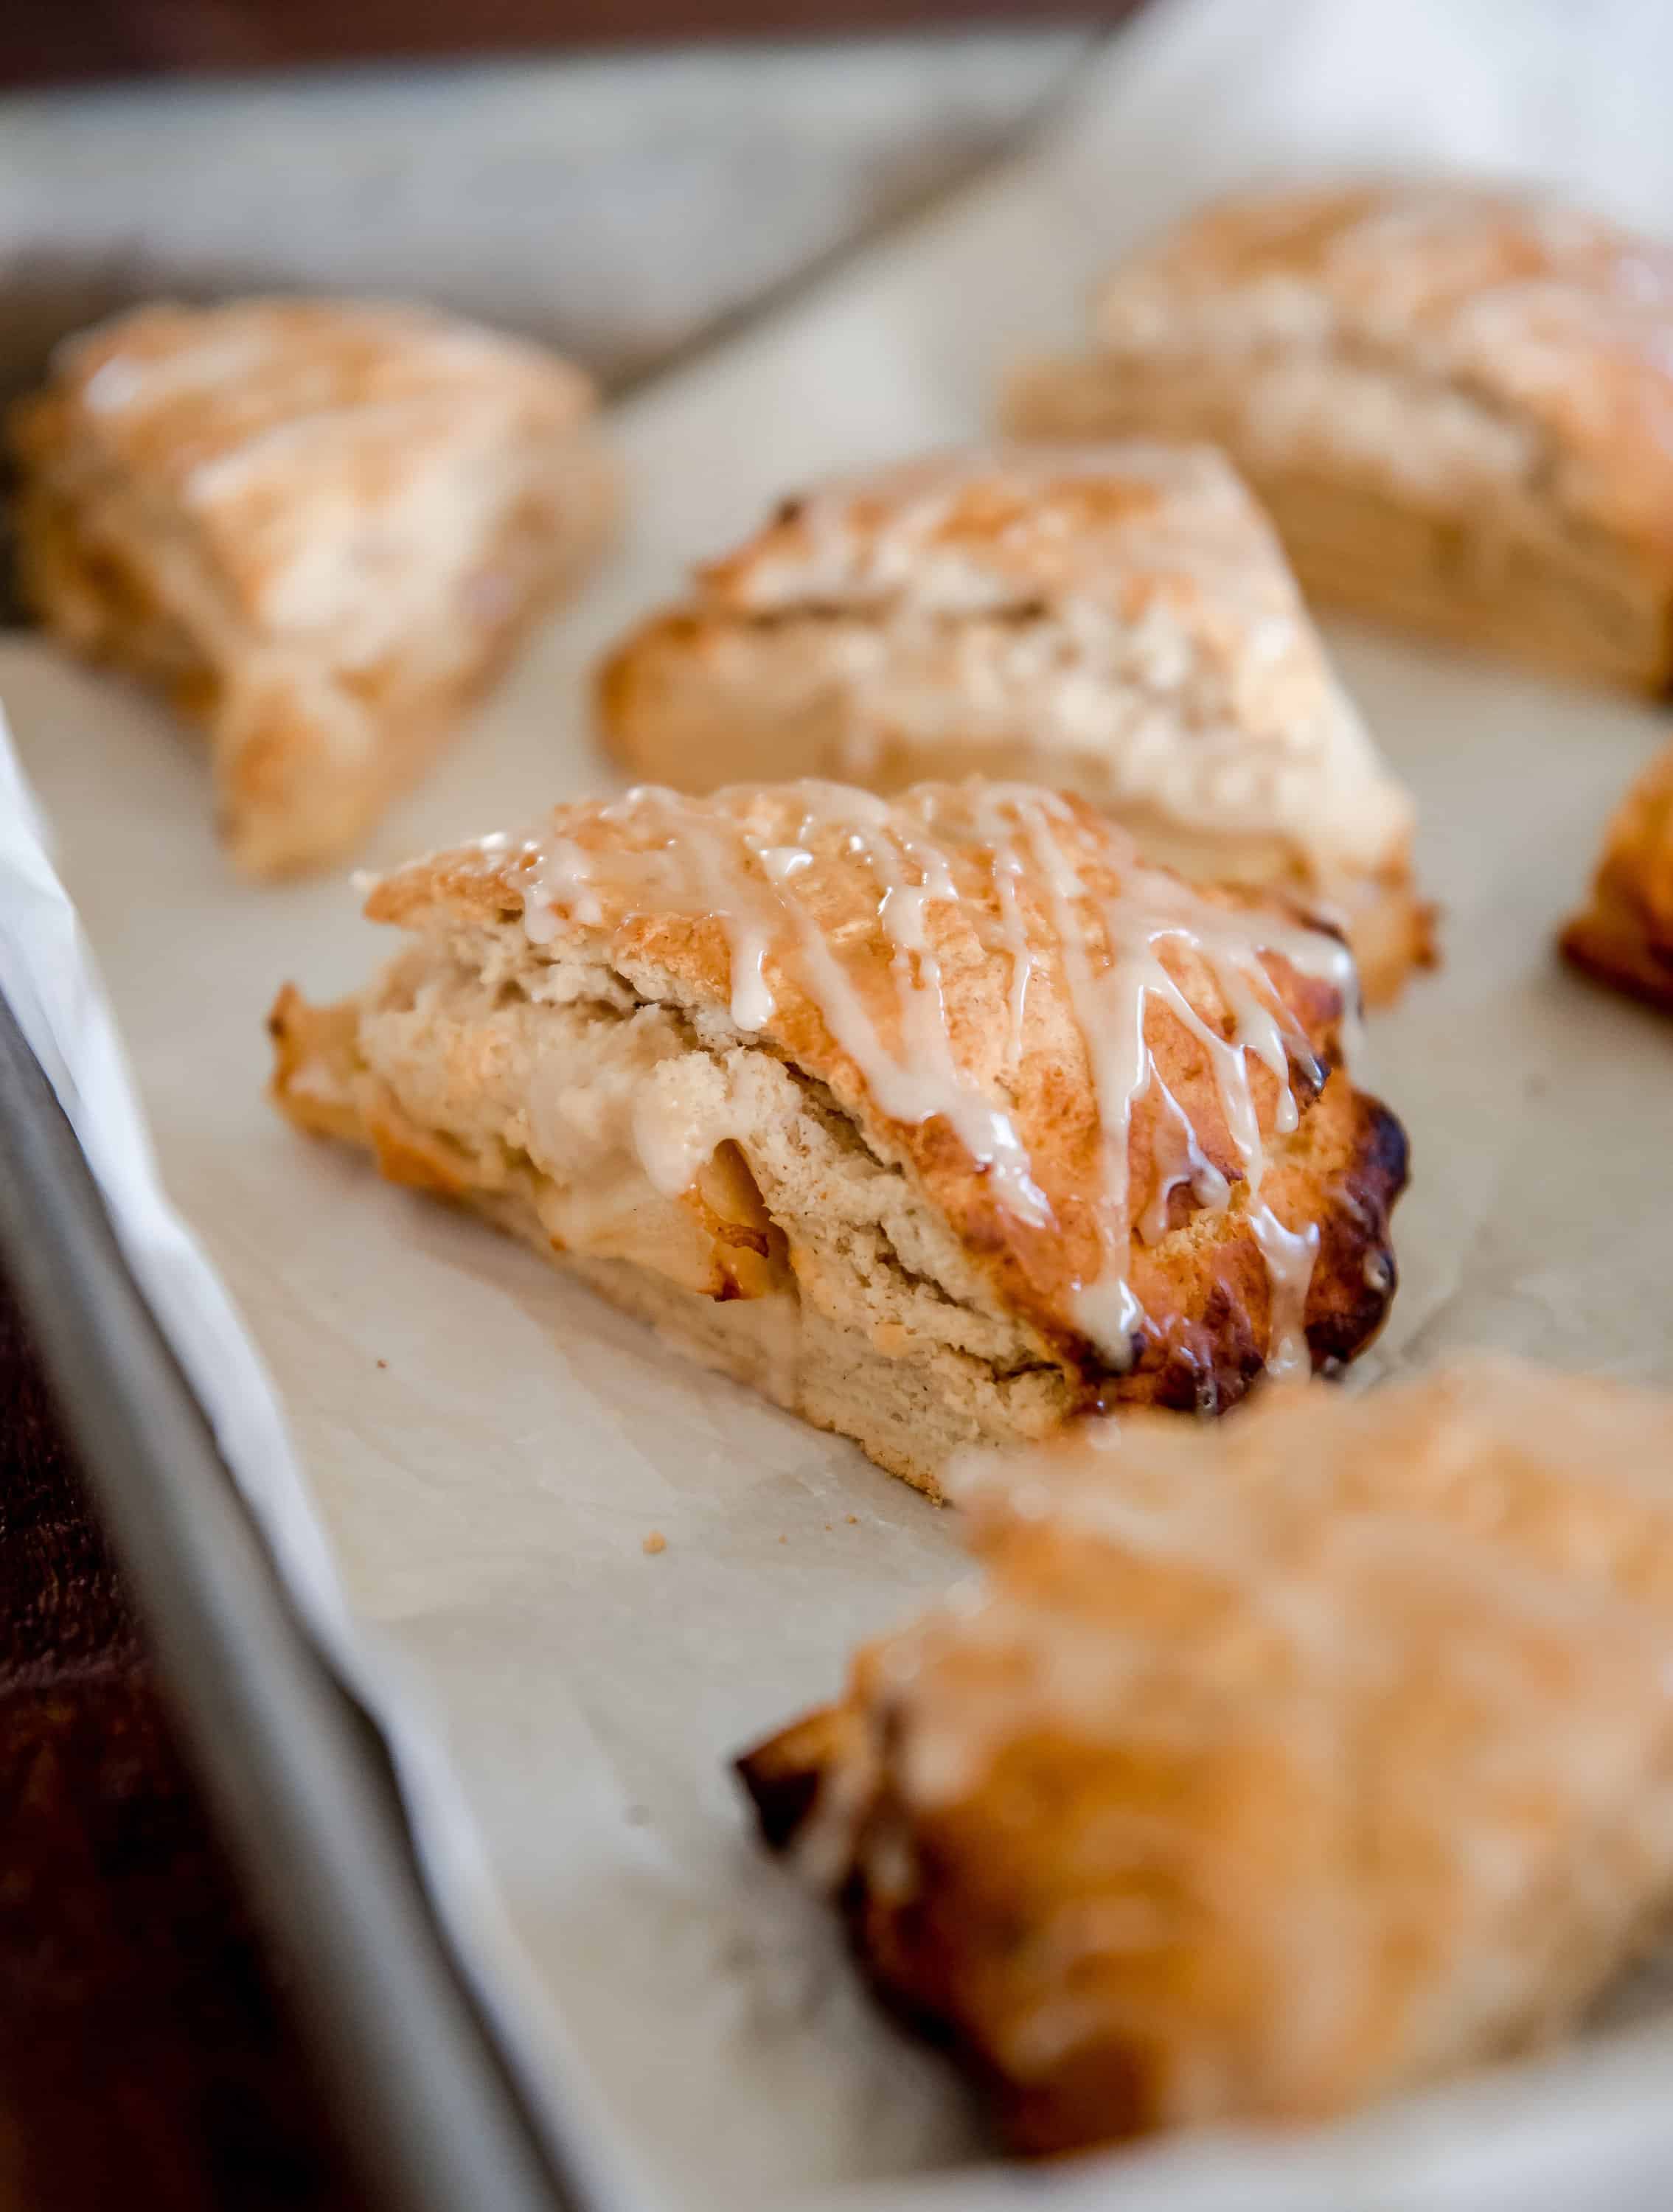 Looking for a delicious recipe for apple scones? You’ve come to the right place! These apple scones feature apple pie filling sandwiched between two layers of buttery dough!